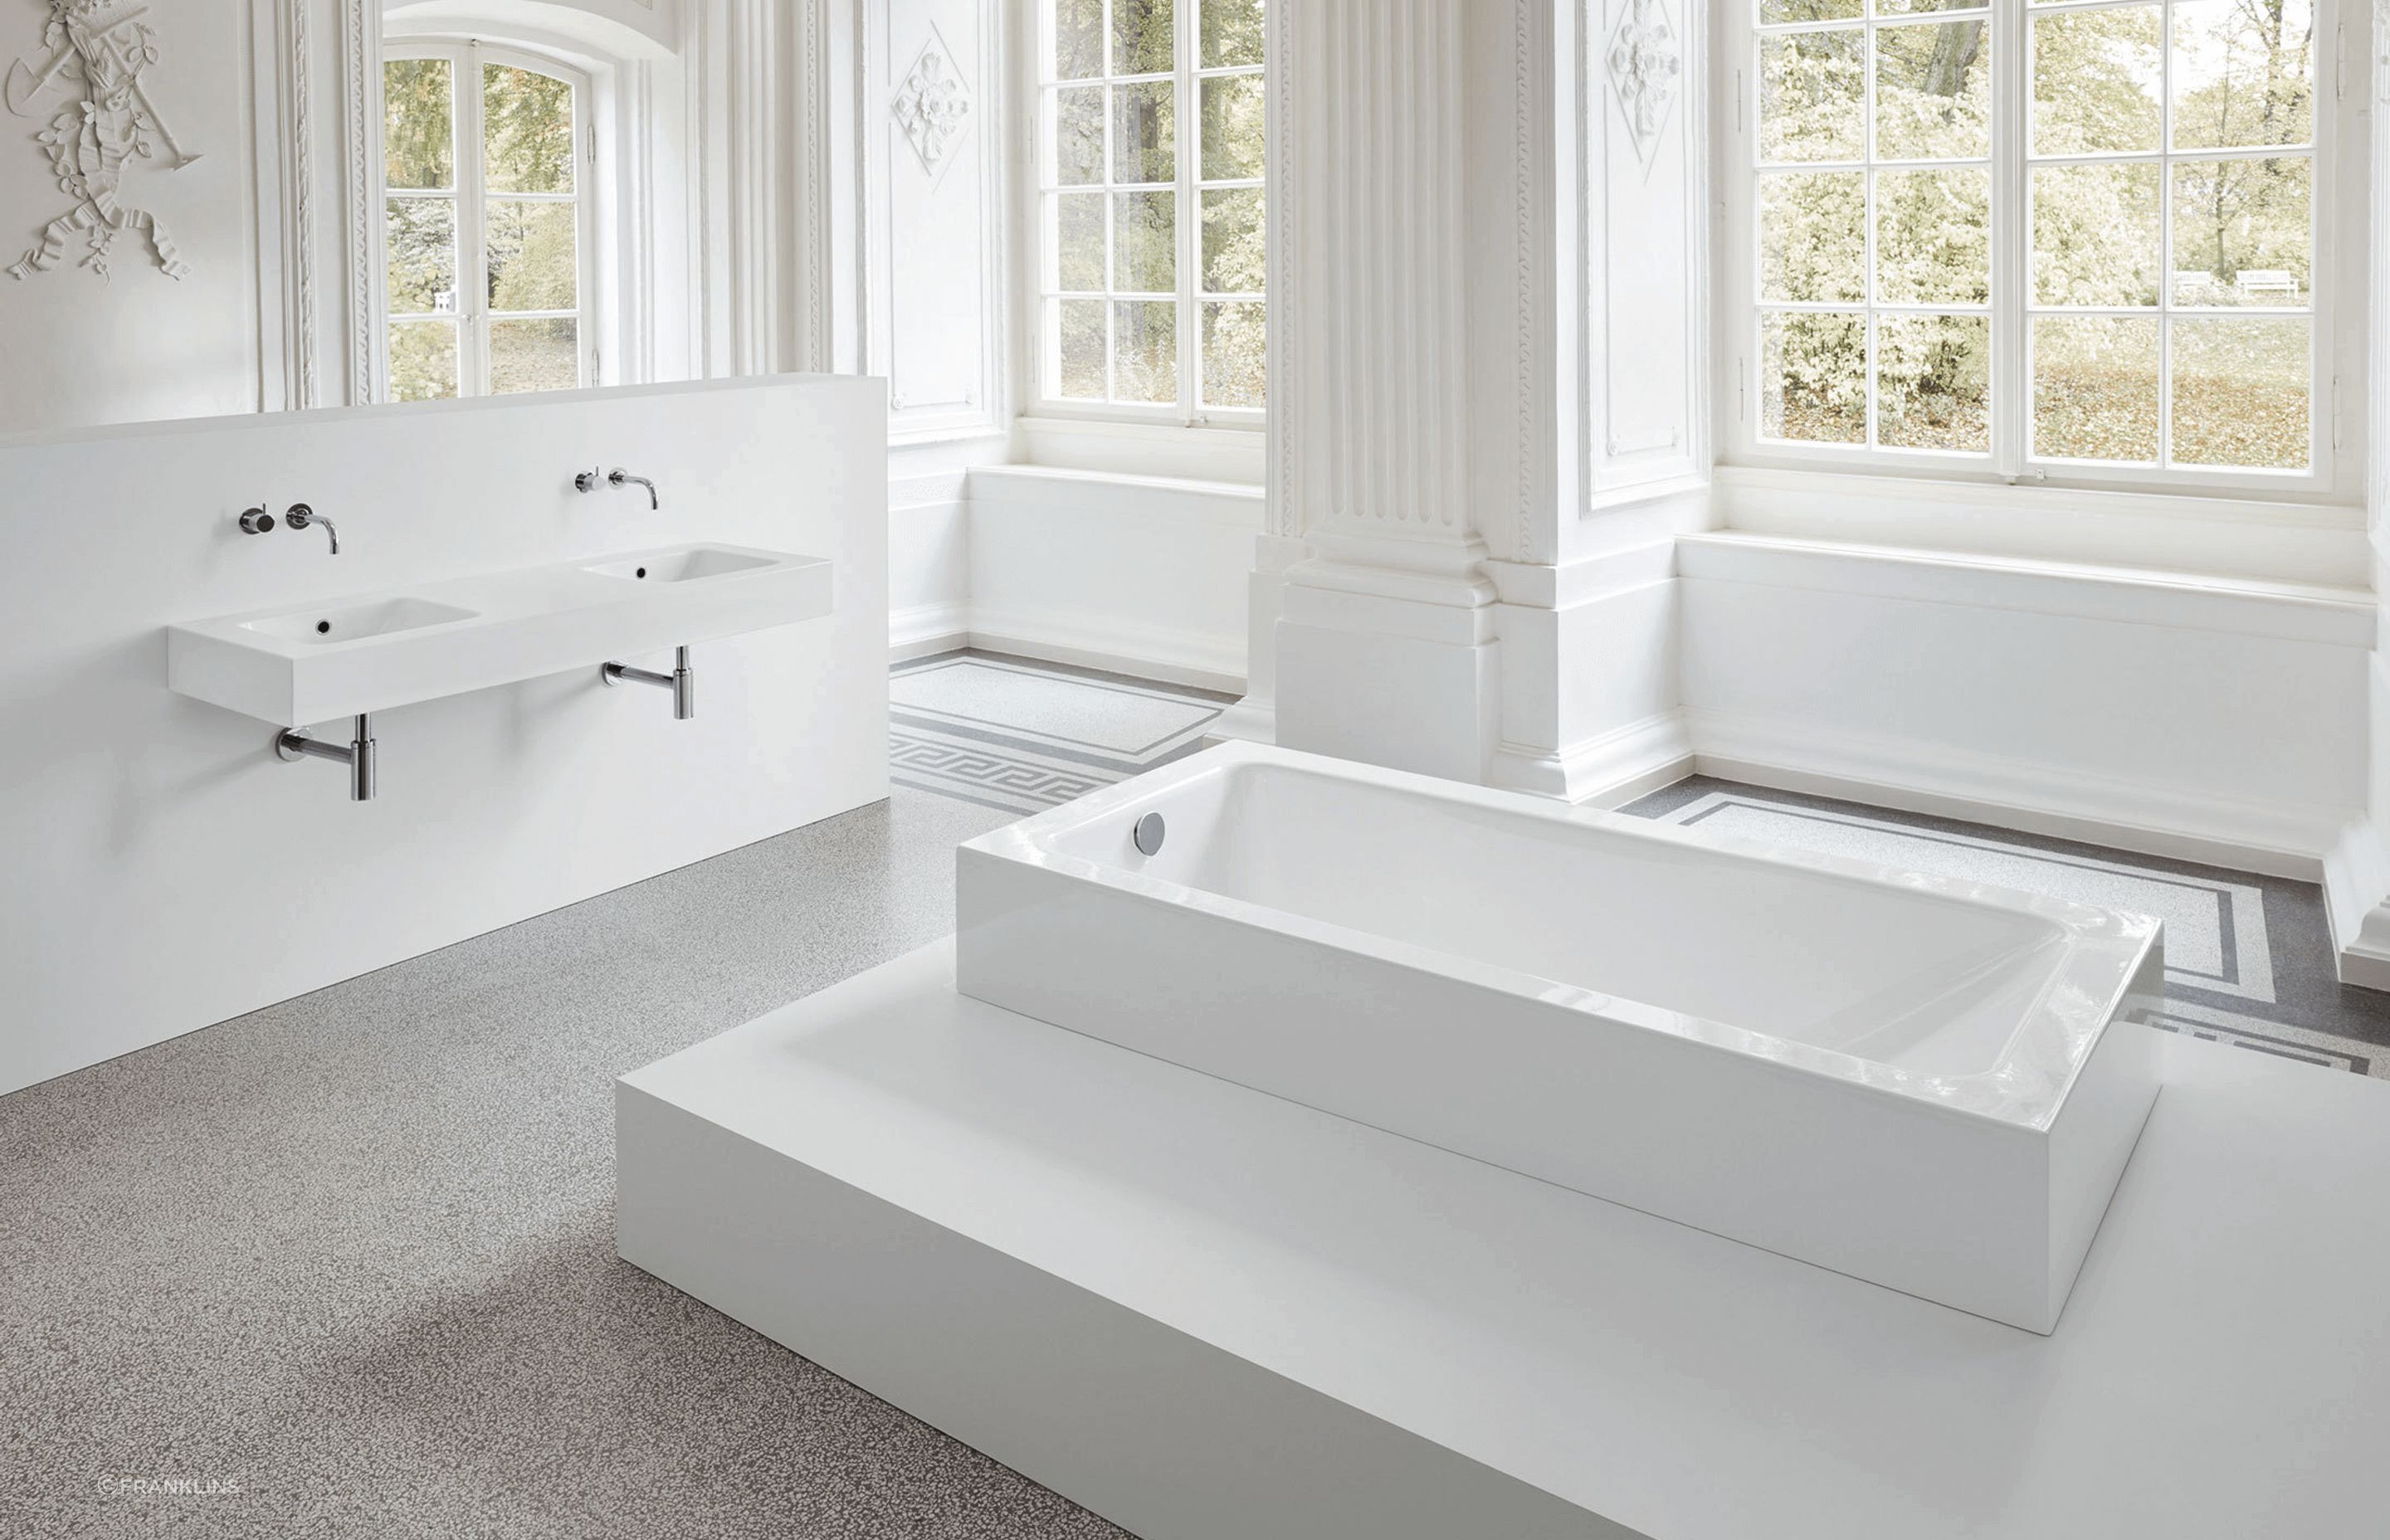 This sleek bath from Bette has an understand elegance that would complement any modern bathroom.